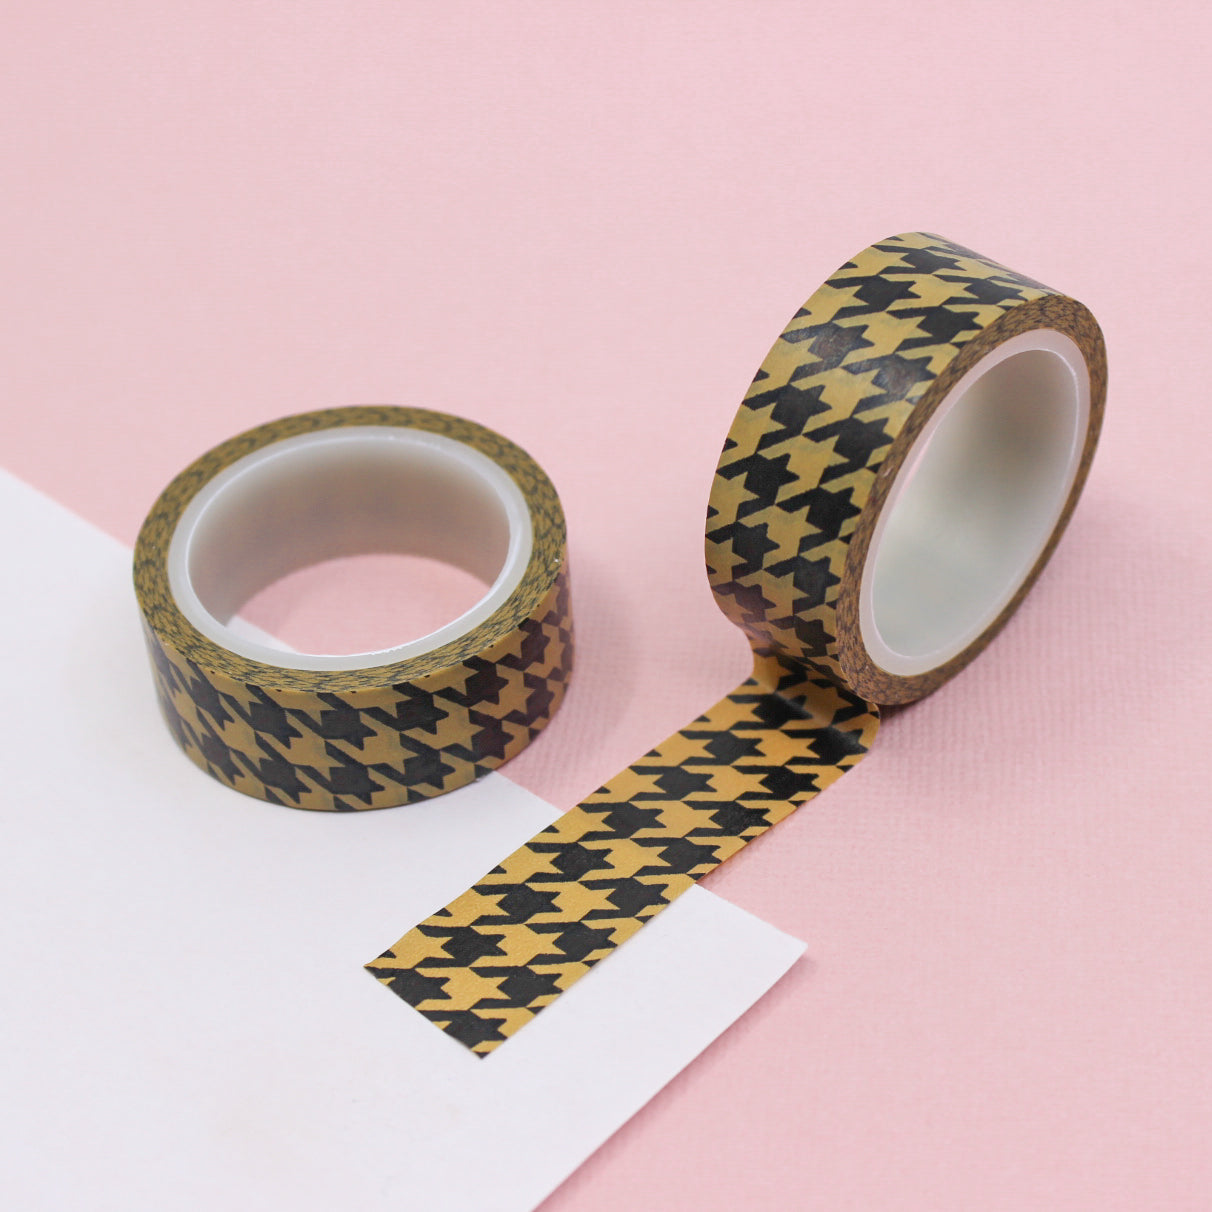 A close-up photo of Warm Brown Houndstooth Pattern Washi Tape. The tape features a classic houndstooth design in warm brown tones. The intricate pattern creates a sense of refined elegance, making it a versatile choice for various creative projects. This tape is sold exclusively at BBB Supplies Craft Shop. 